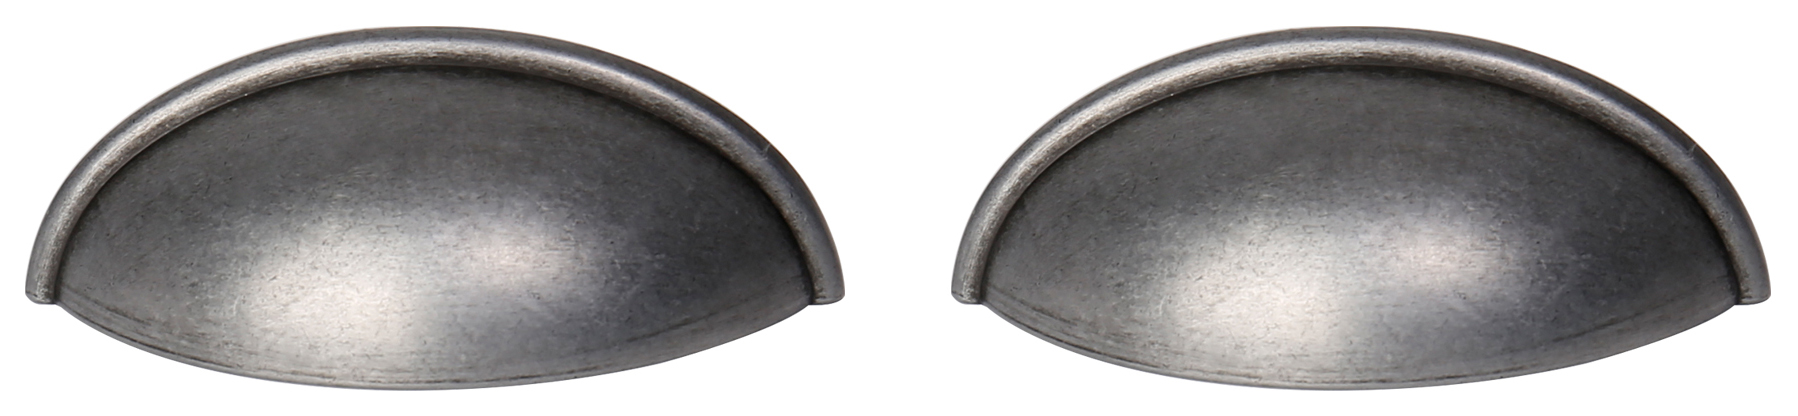 Cup Cabinet Handle Cast Iron 80mm - Pack of 2